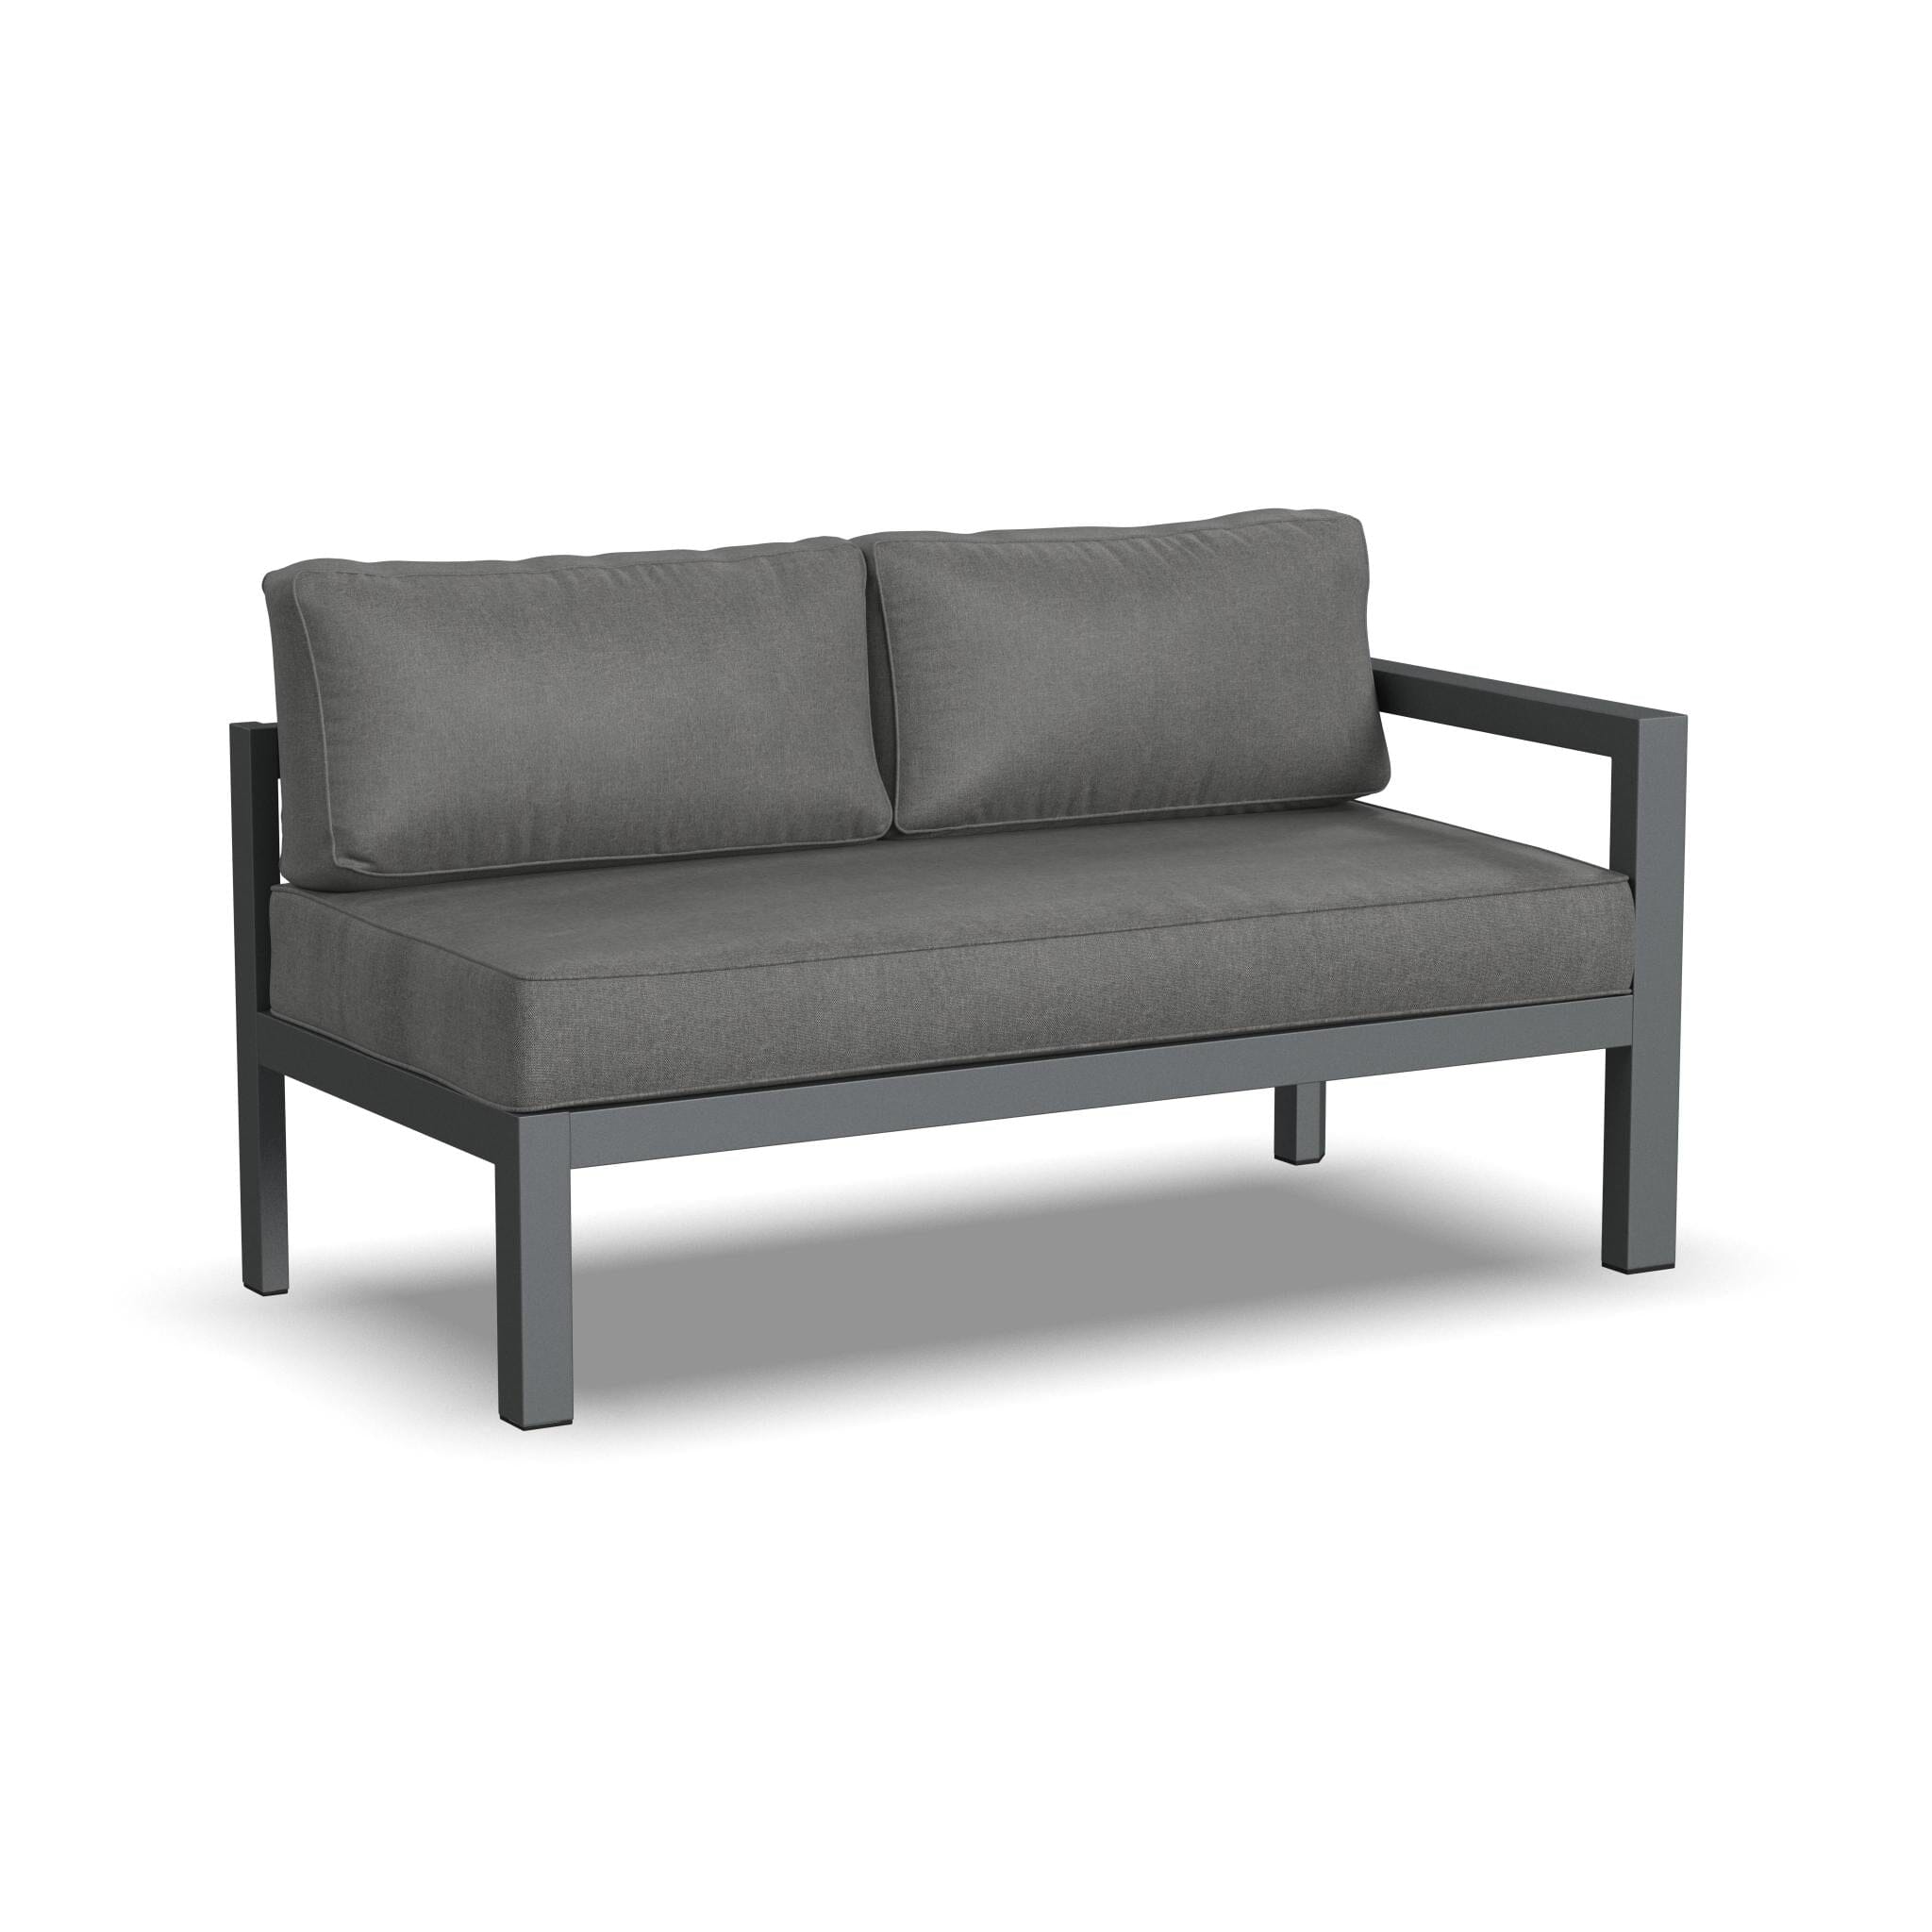 Modern & Contemporary 5 Seat Sectional By Grayton Outdoor Seating Grayton